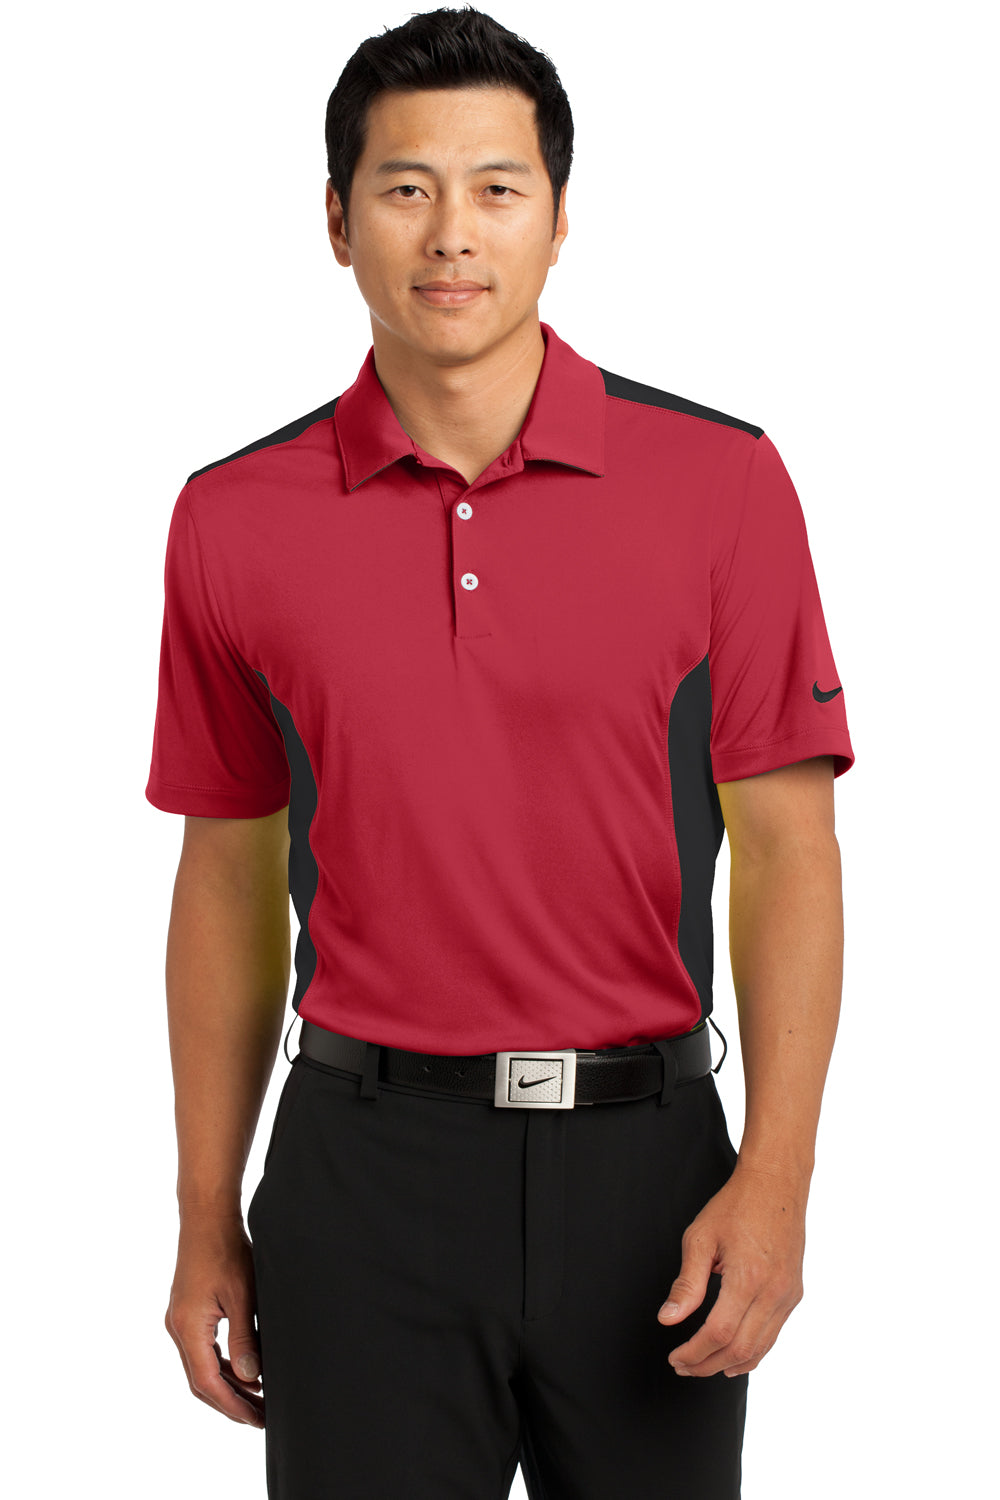 Nike 632418 Mens Dri-Fit Moisture Wicking Short Sleeve Polo Shirt Red/Black Front